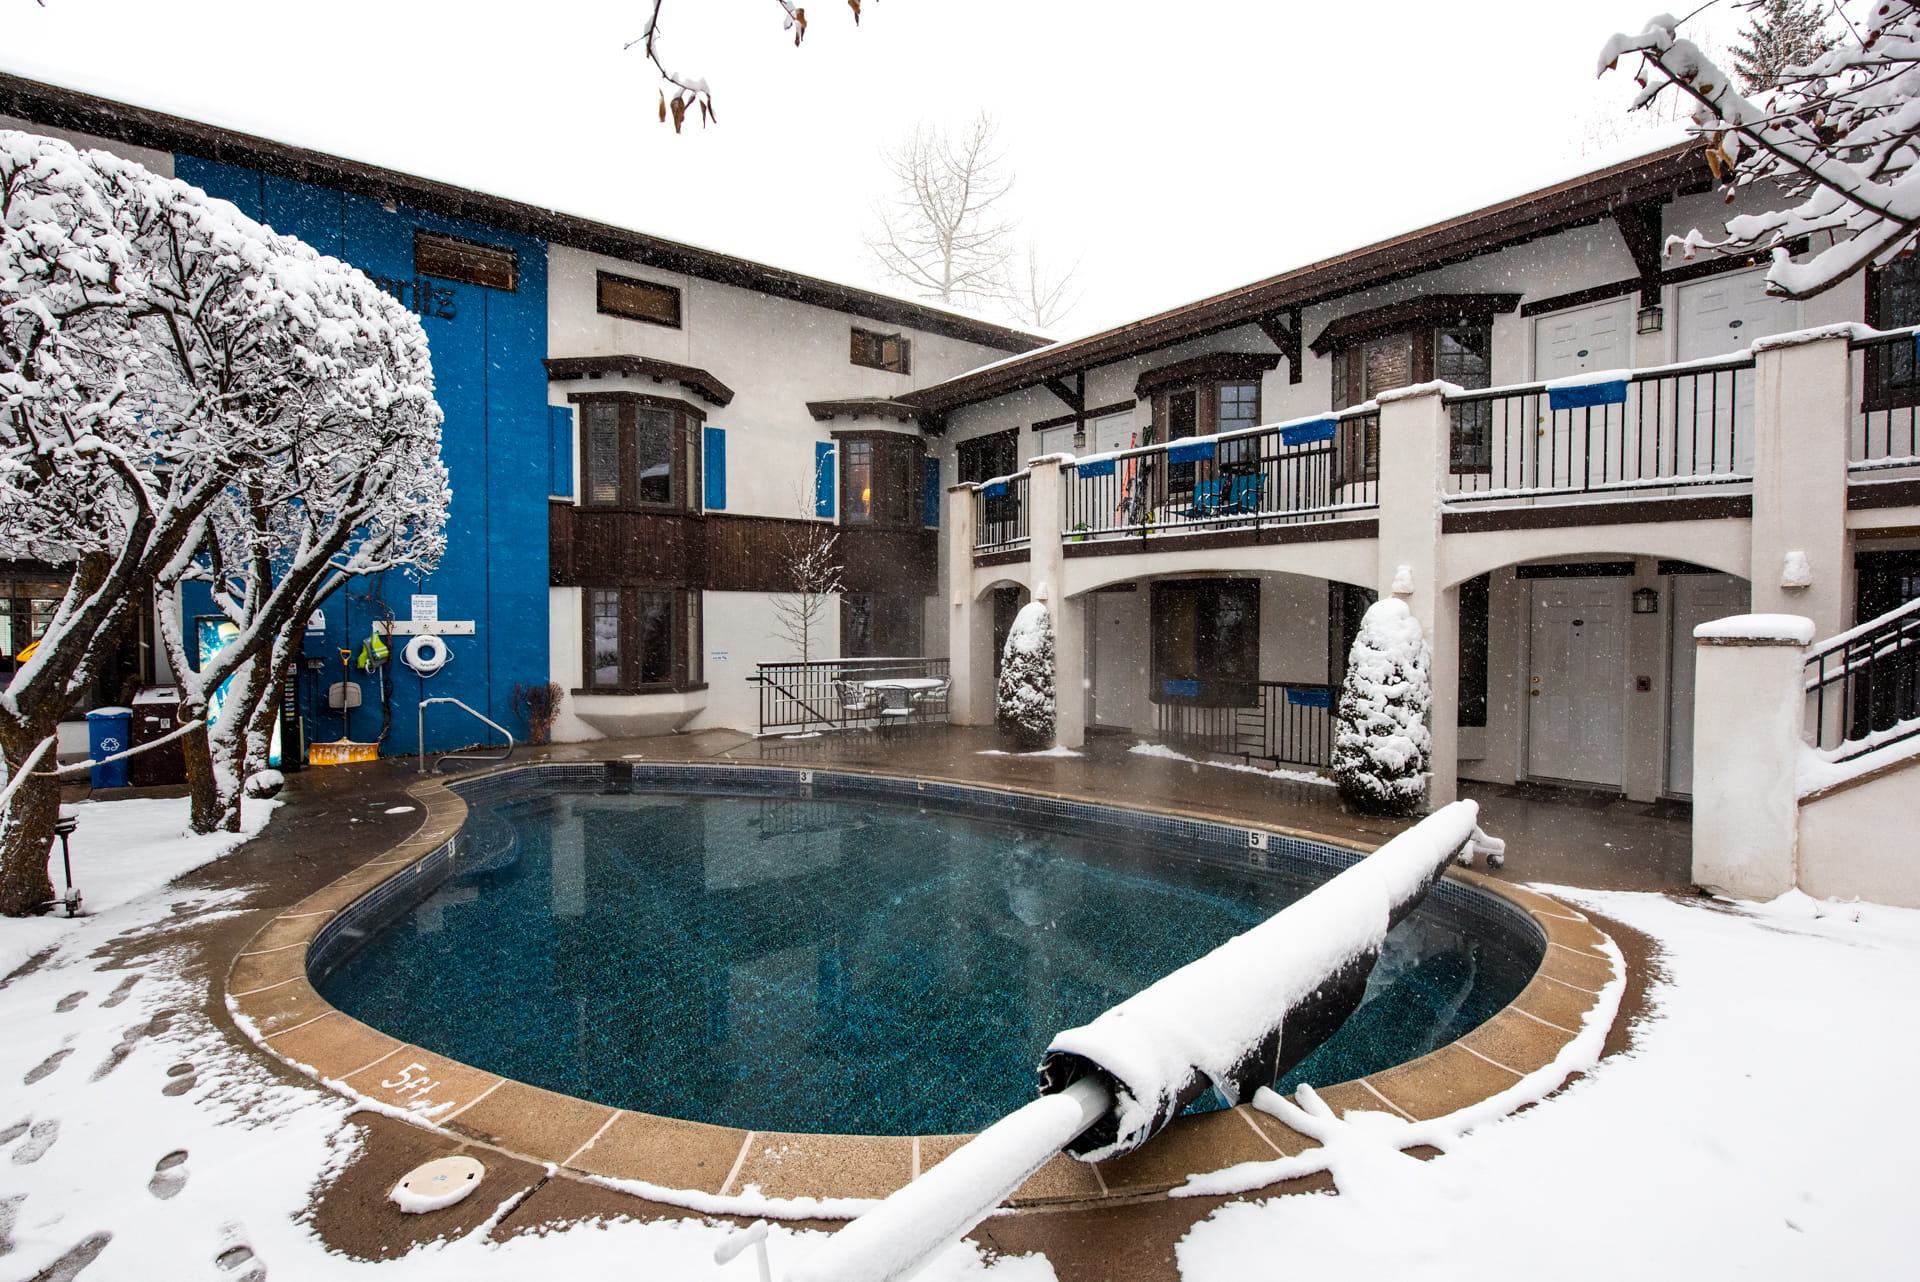 Heated Pool/Whirlpool at 102 Degrees during the winter Season.